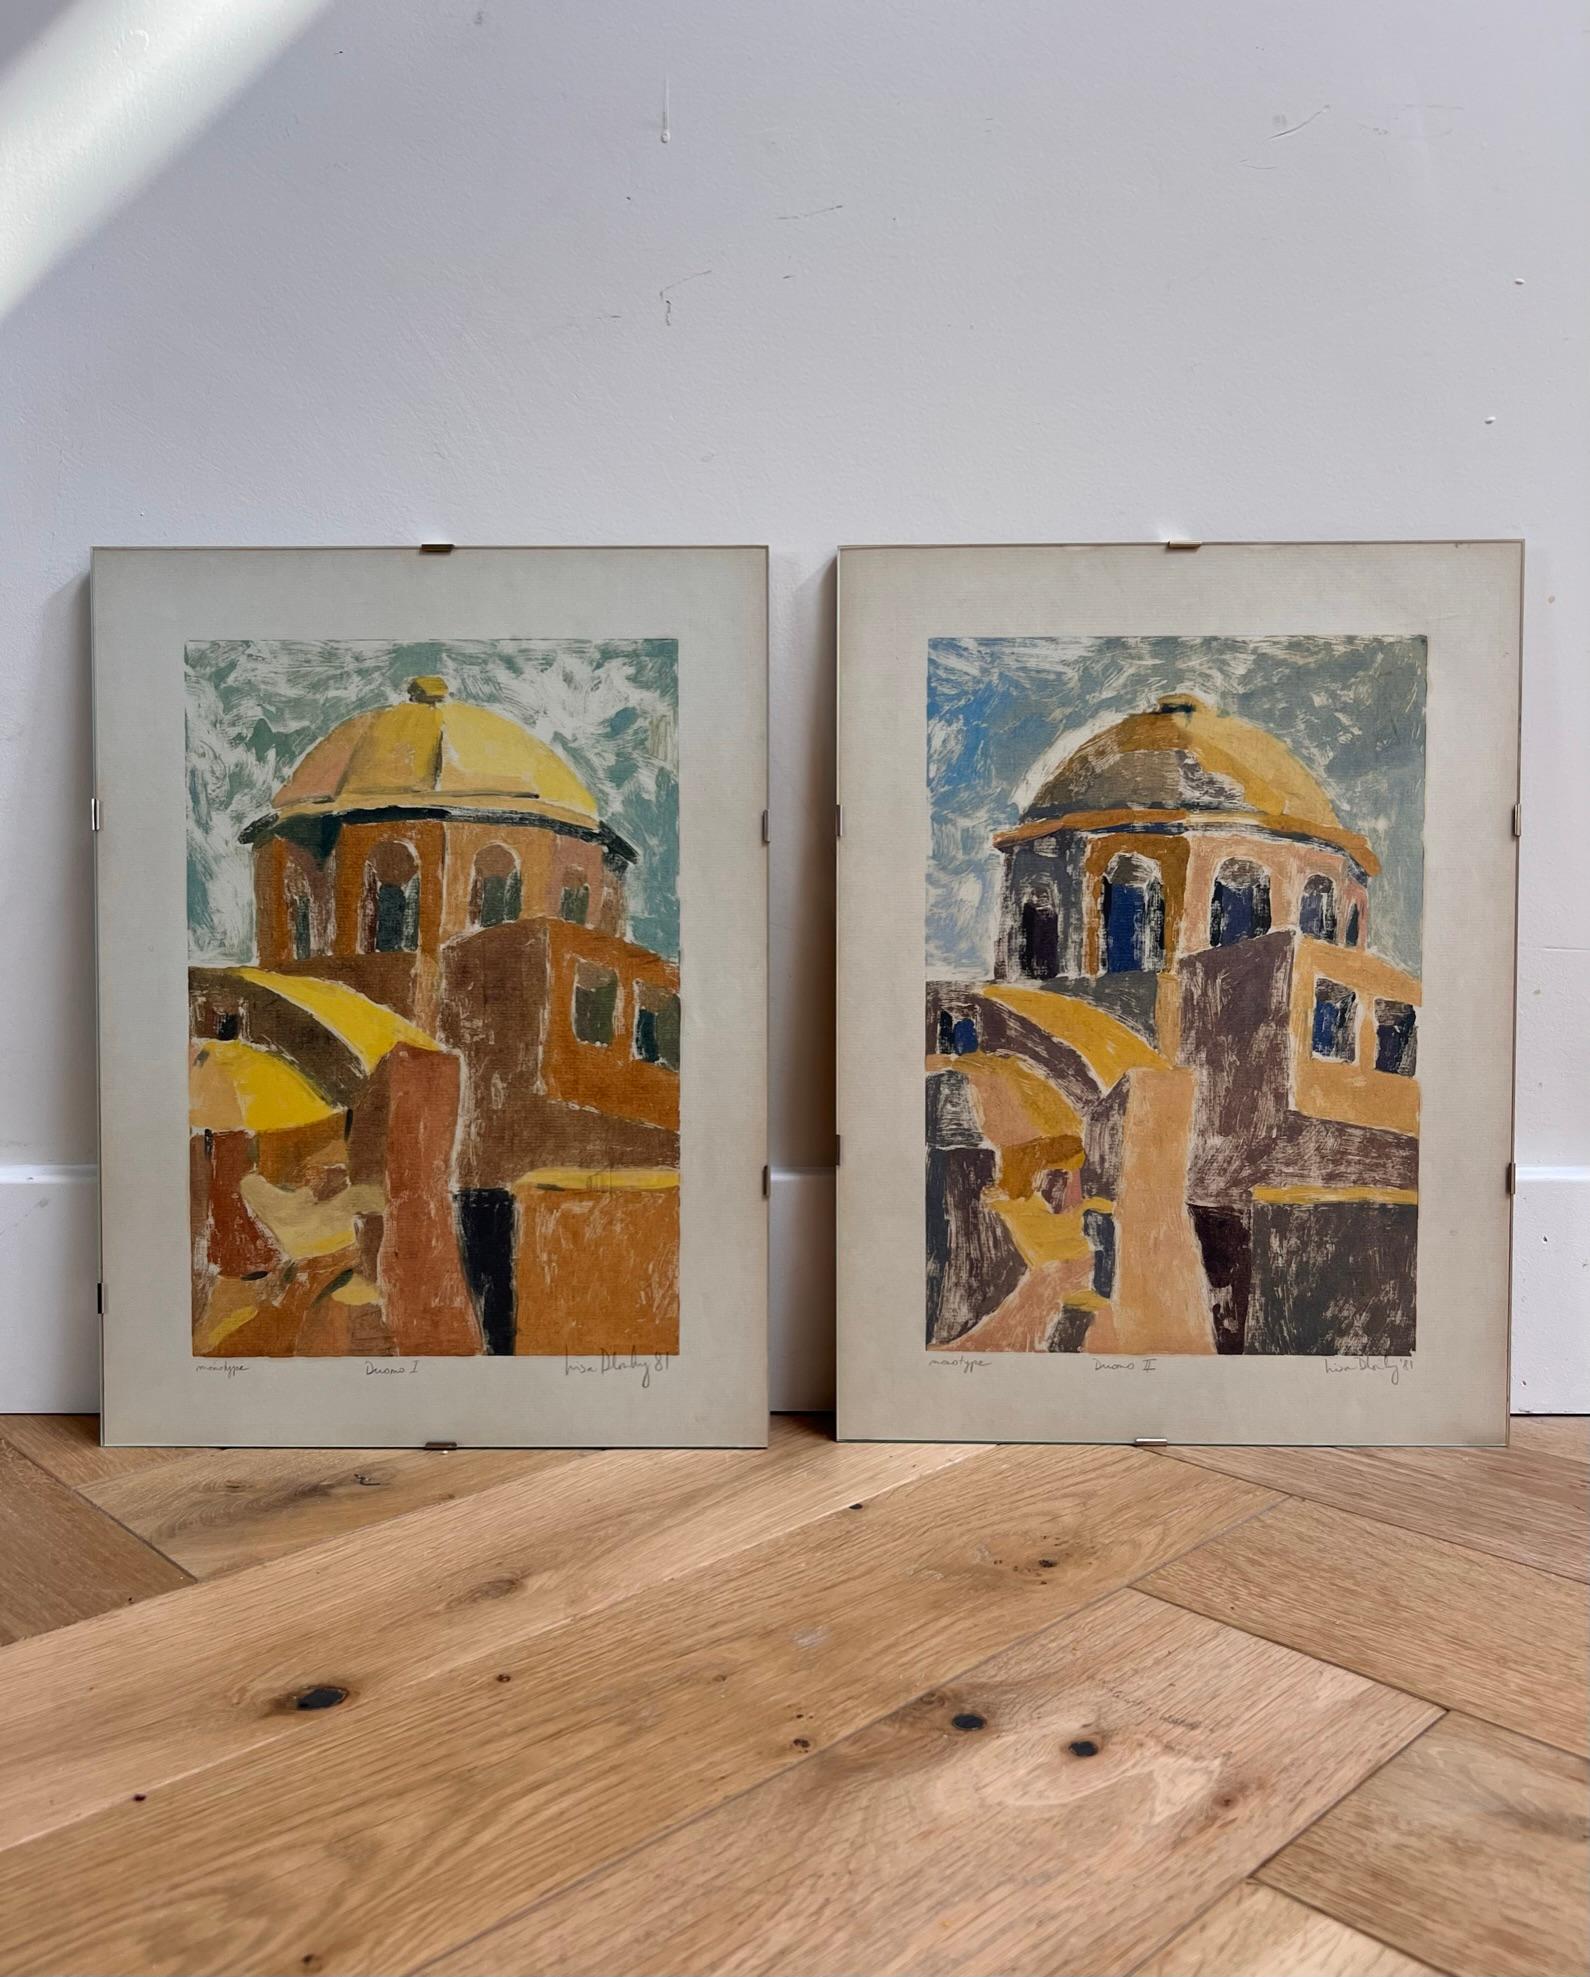 Two original monotype etching prints, “Duomo I” and “Duomo II” by artist Lisa Dlouhy, made in Italy 1981. Dlouhy is a Czech-Armenian artist who studied under the close tutelage of renowned Italian artist Manlio Guberti. Guberti was mainly known for